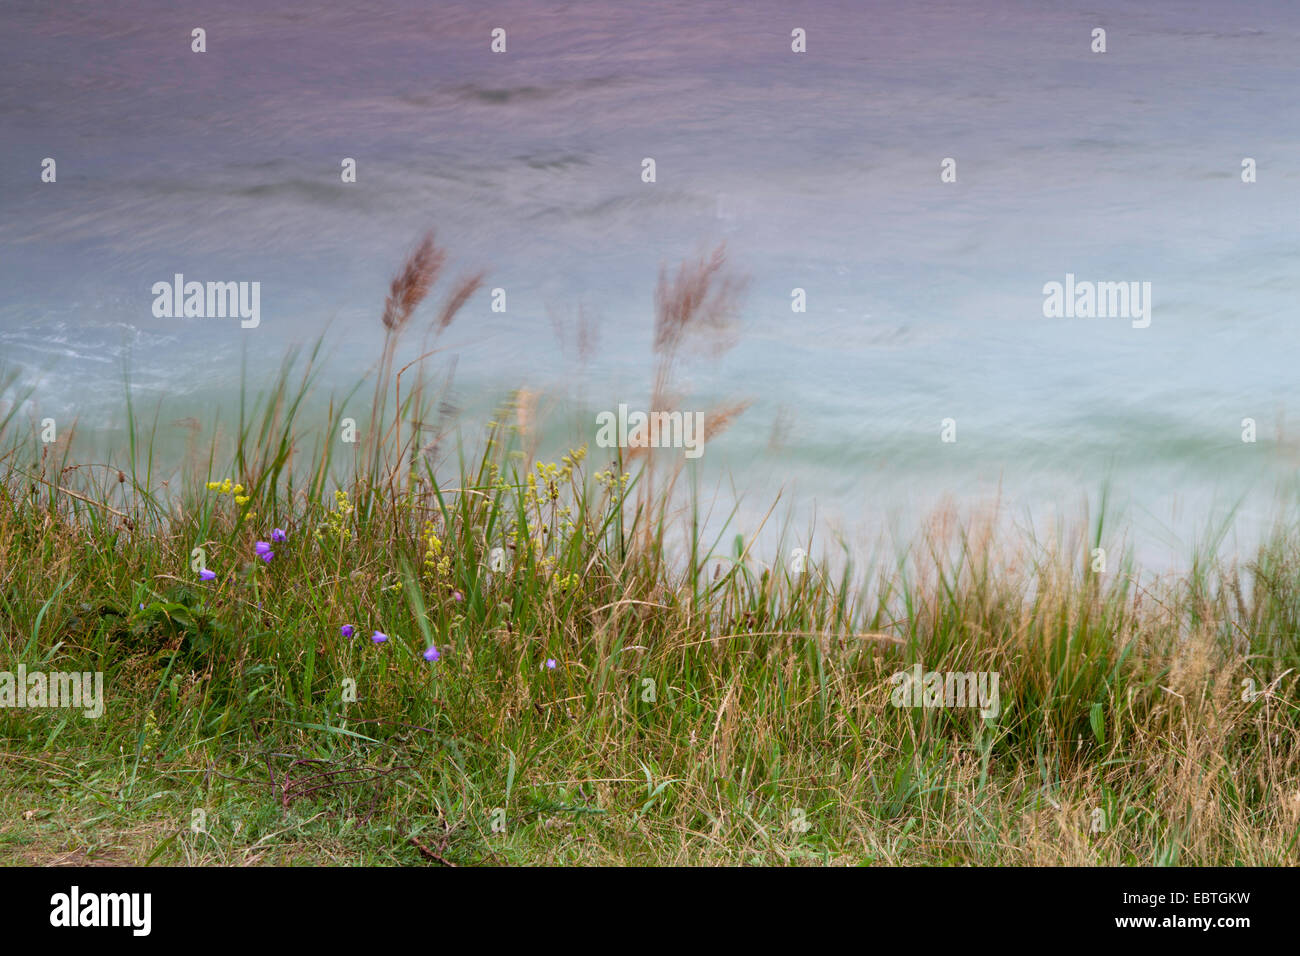 grasses blowing in the wind, Baltic Sea in background, Germany, Mecklenburg-Western Pomerania, Wustrow Stock Photo